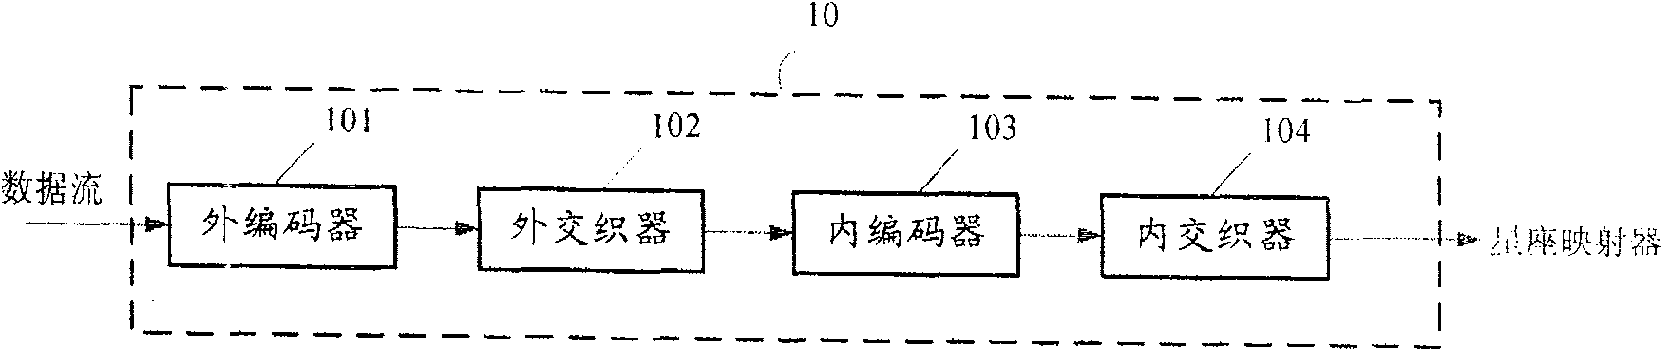 Channel coding and interleaving in mobile media broadcast, and decoding and deleaving method